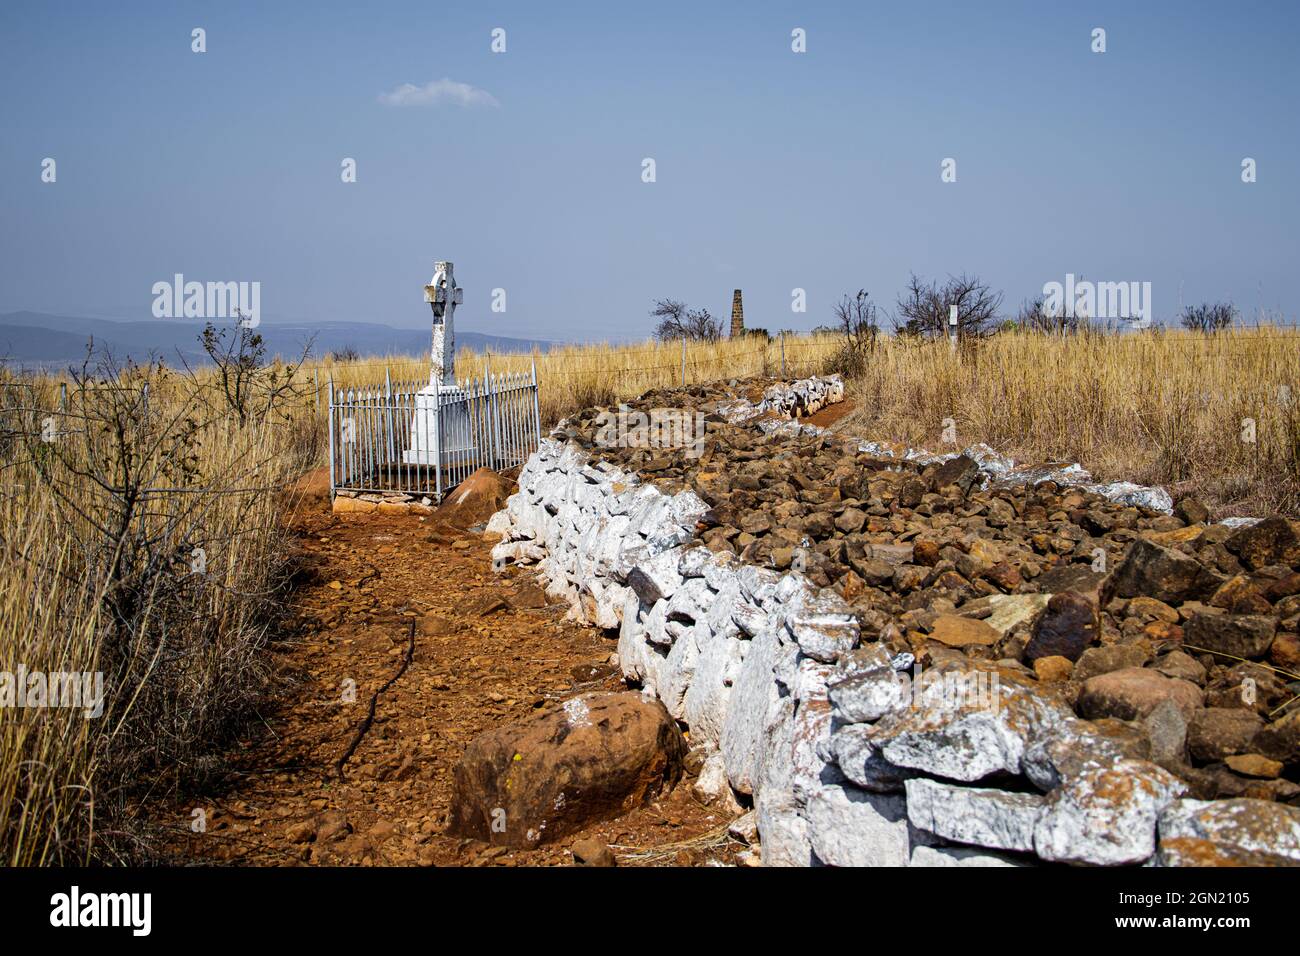 BERGVILLE, SOUTH AFRICA - Aug 21, 2021: A monument at the Spionkop Battlefield near Bergville, Kwa-zulu Natal Stock Photo